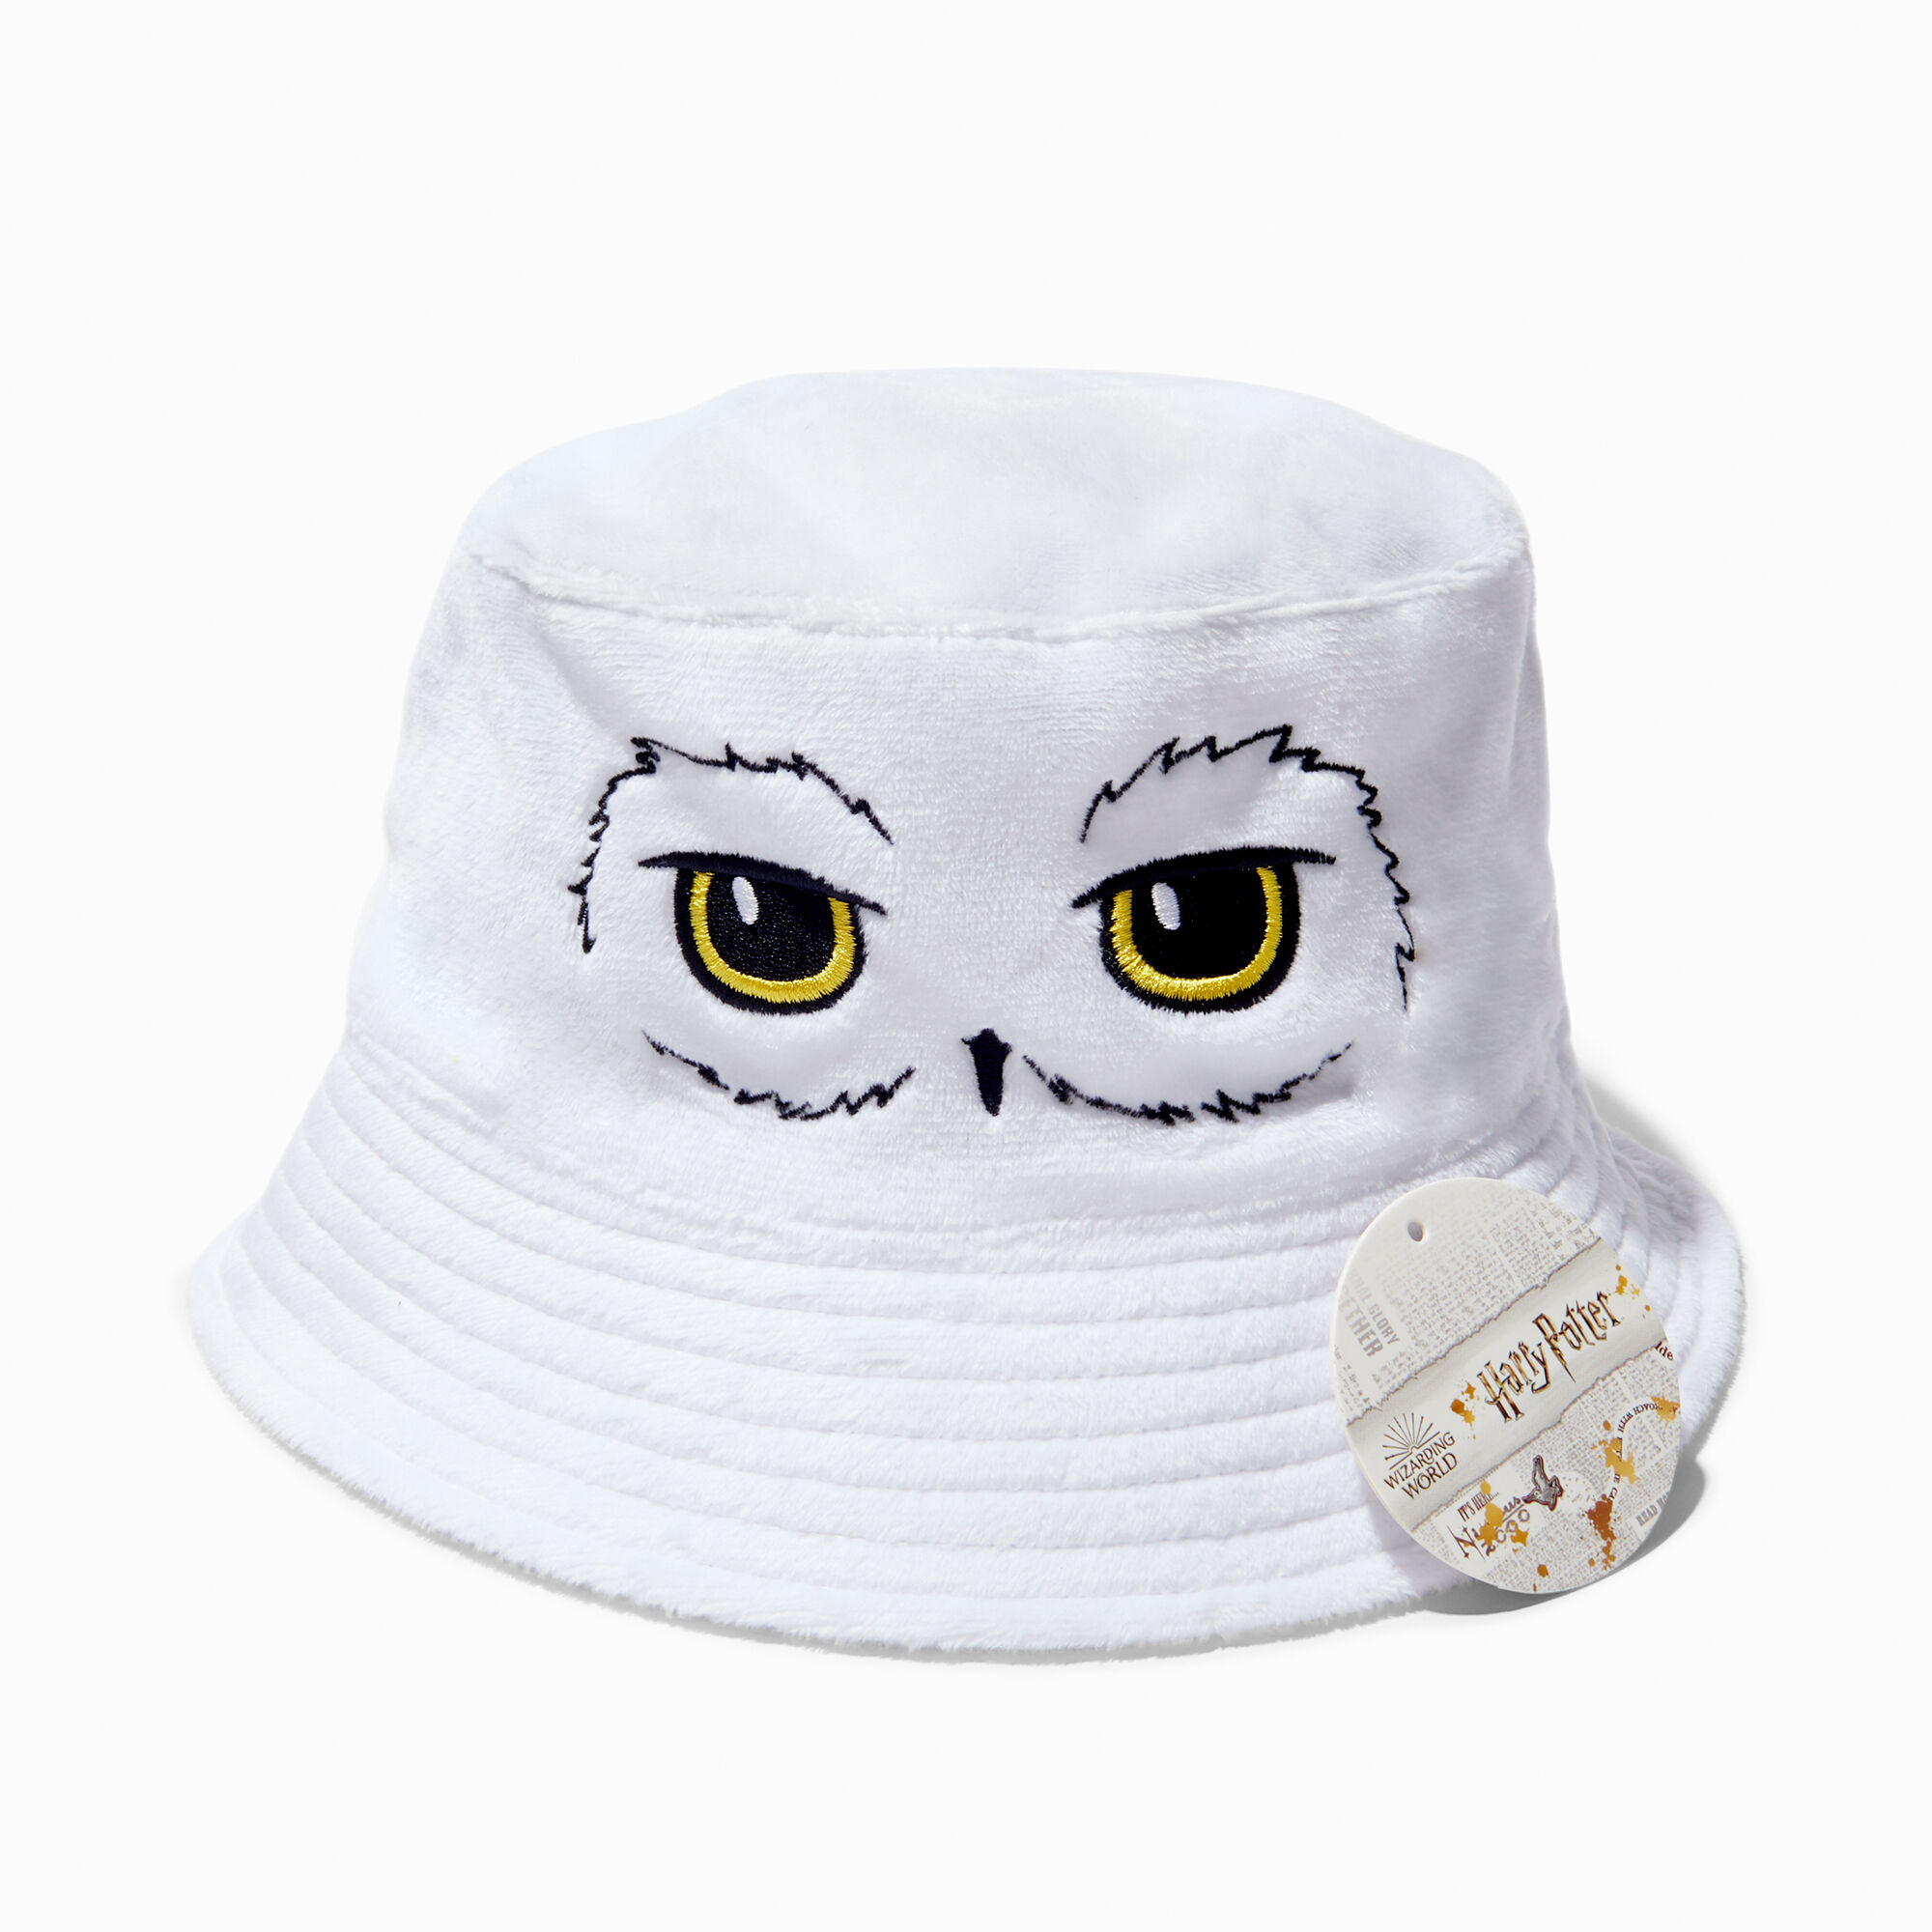 View Claires Harry Potter Hedwig Bucket Hat information